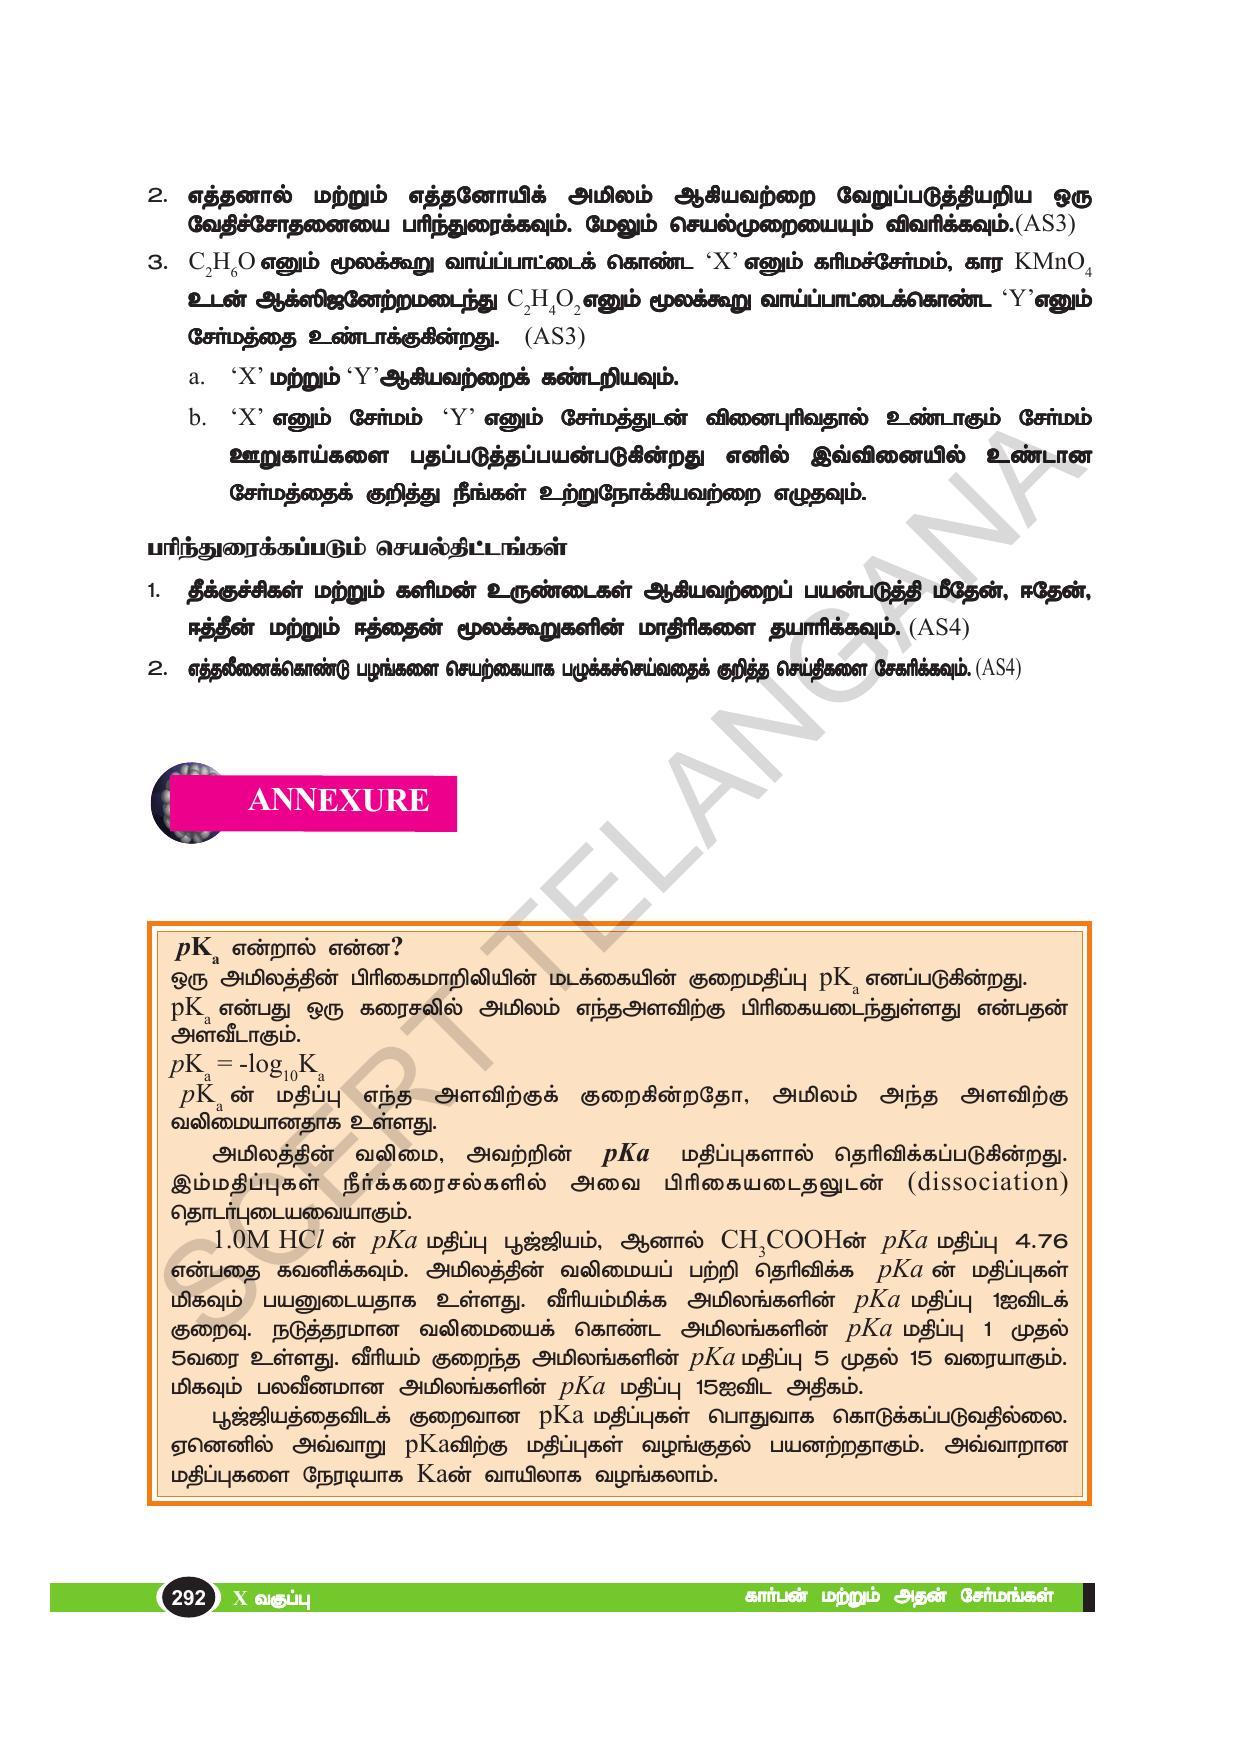 TS SCERT Class 10 Physical Science(Tamil Medium) Text Book - Page 304